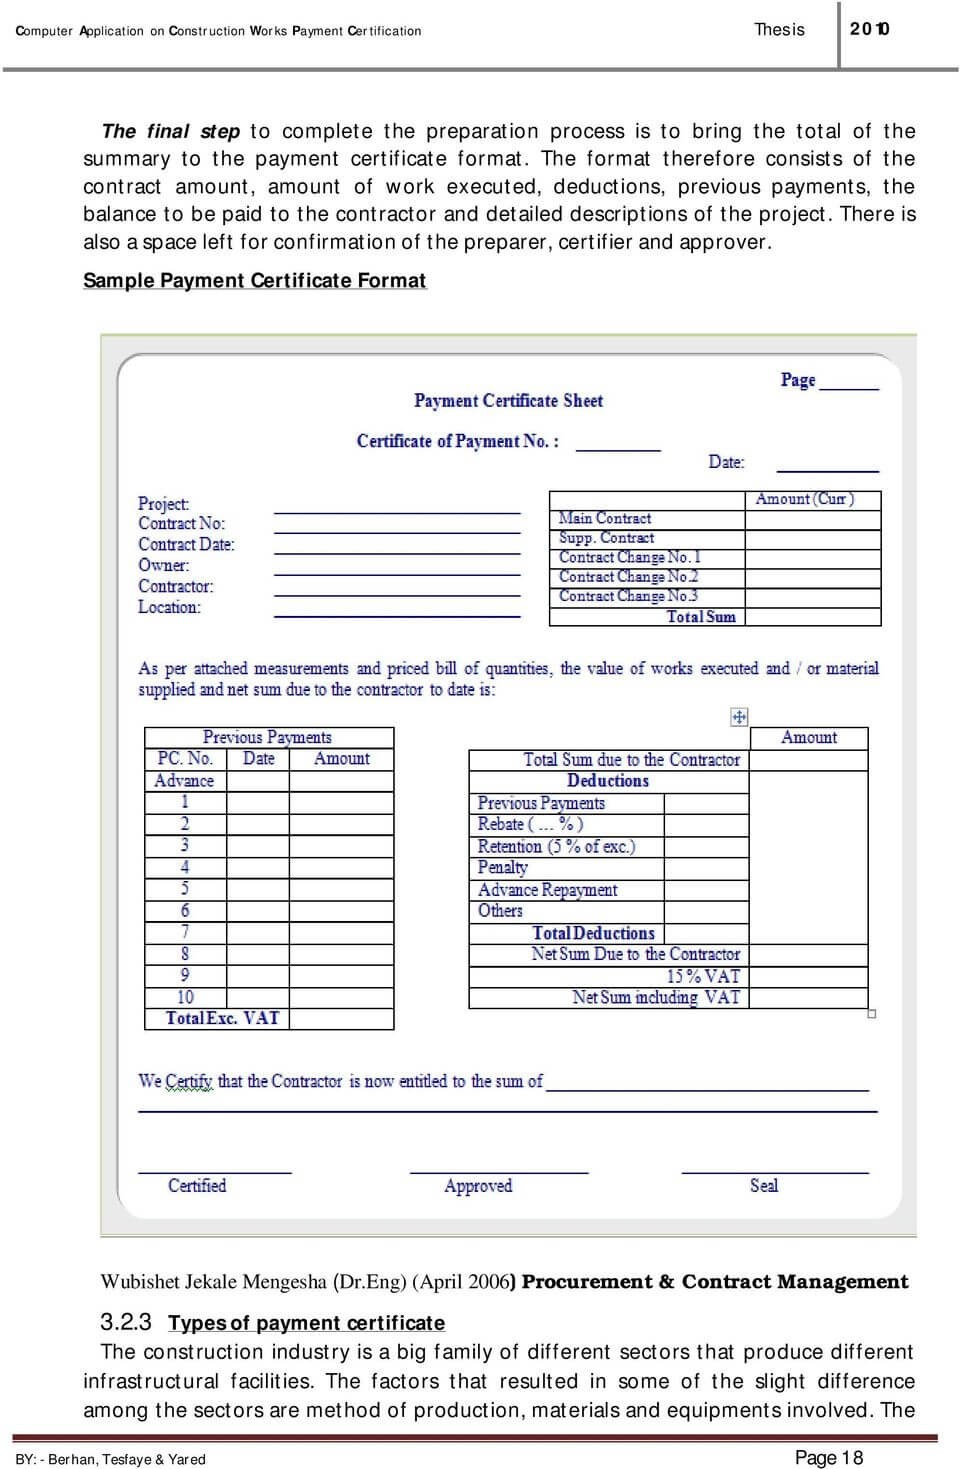 Computer Application On Construction Works Payment With Construction Payment Certificate Template